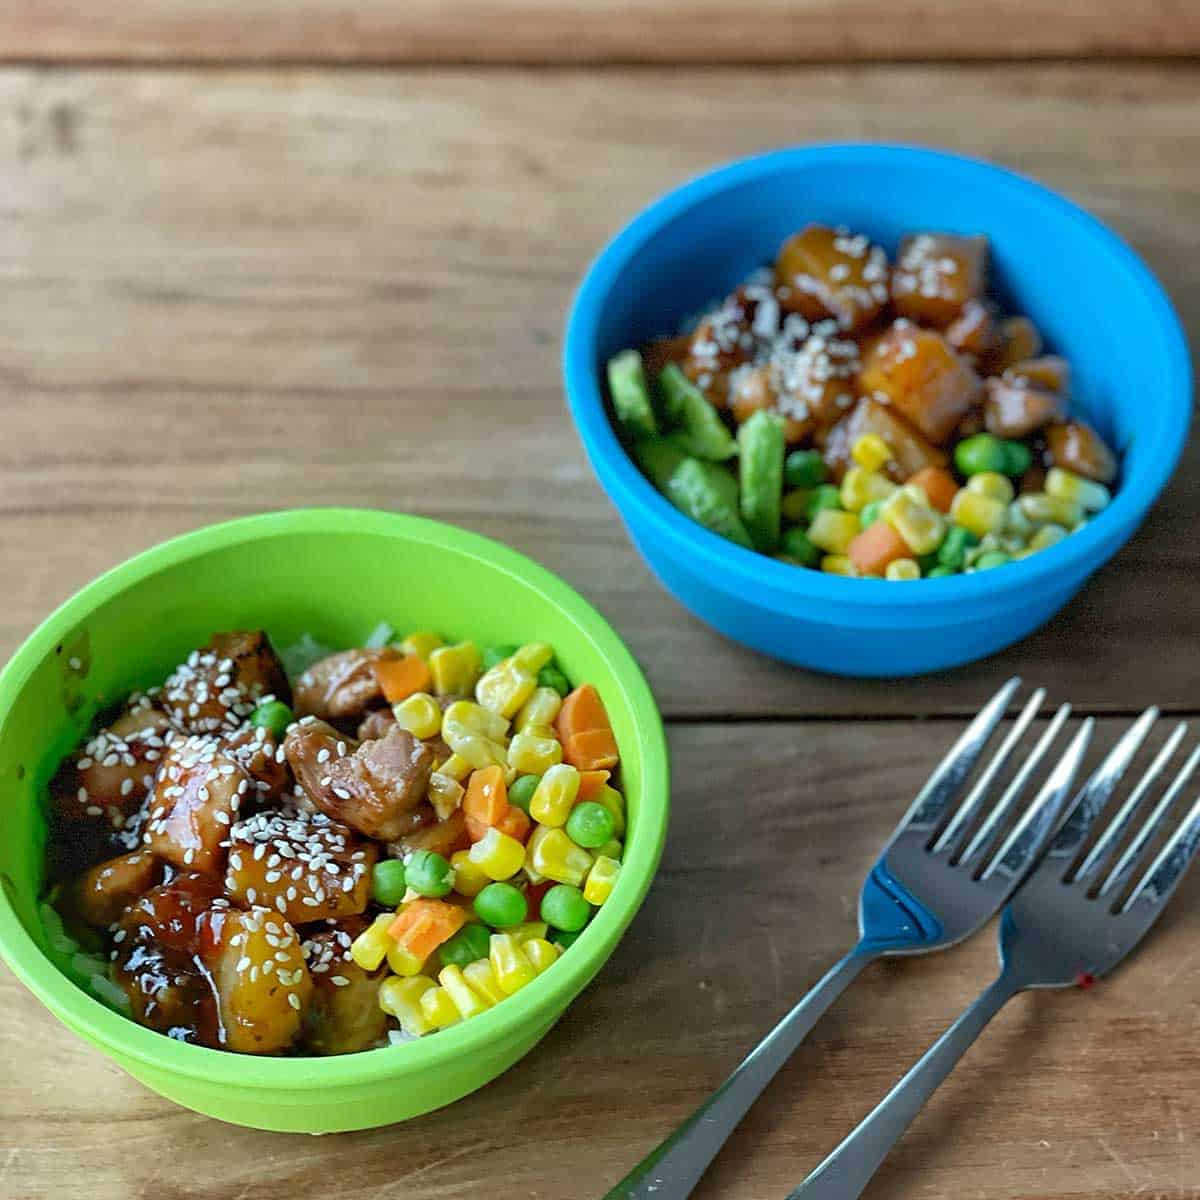 Two small servings of Sticky Pineapple Chicken in plastic blue and green bowls.